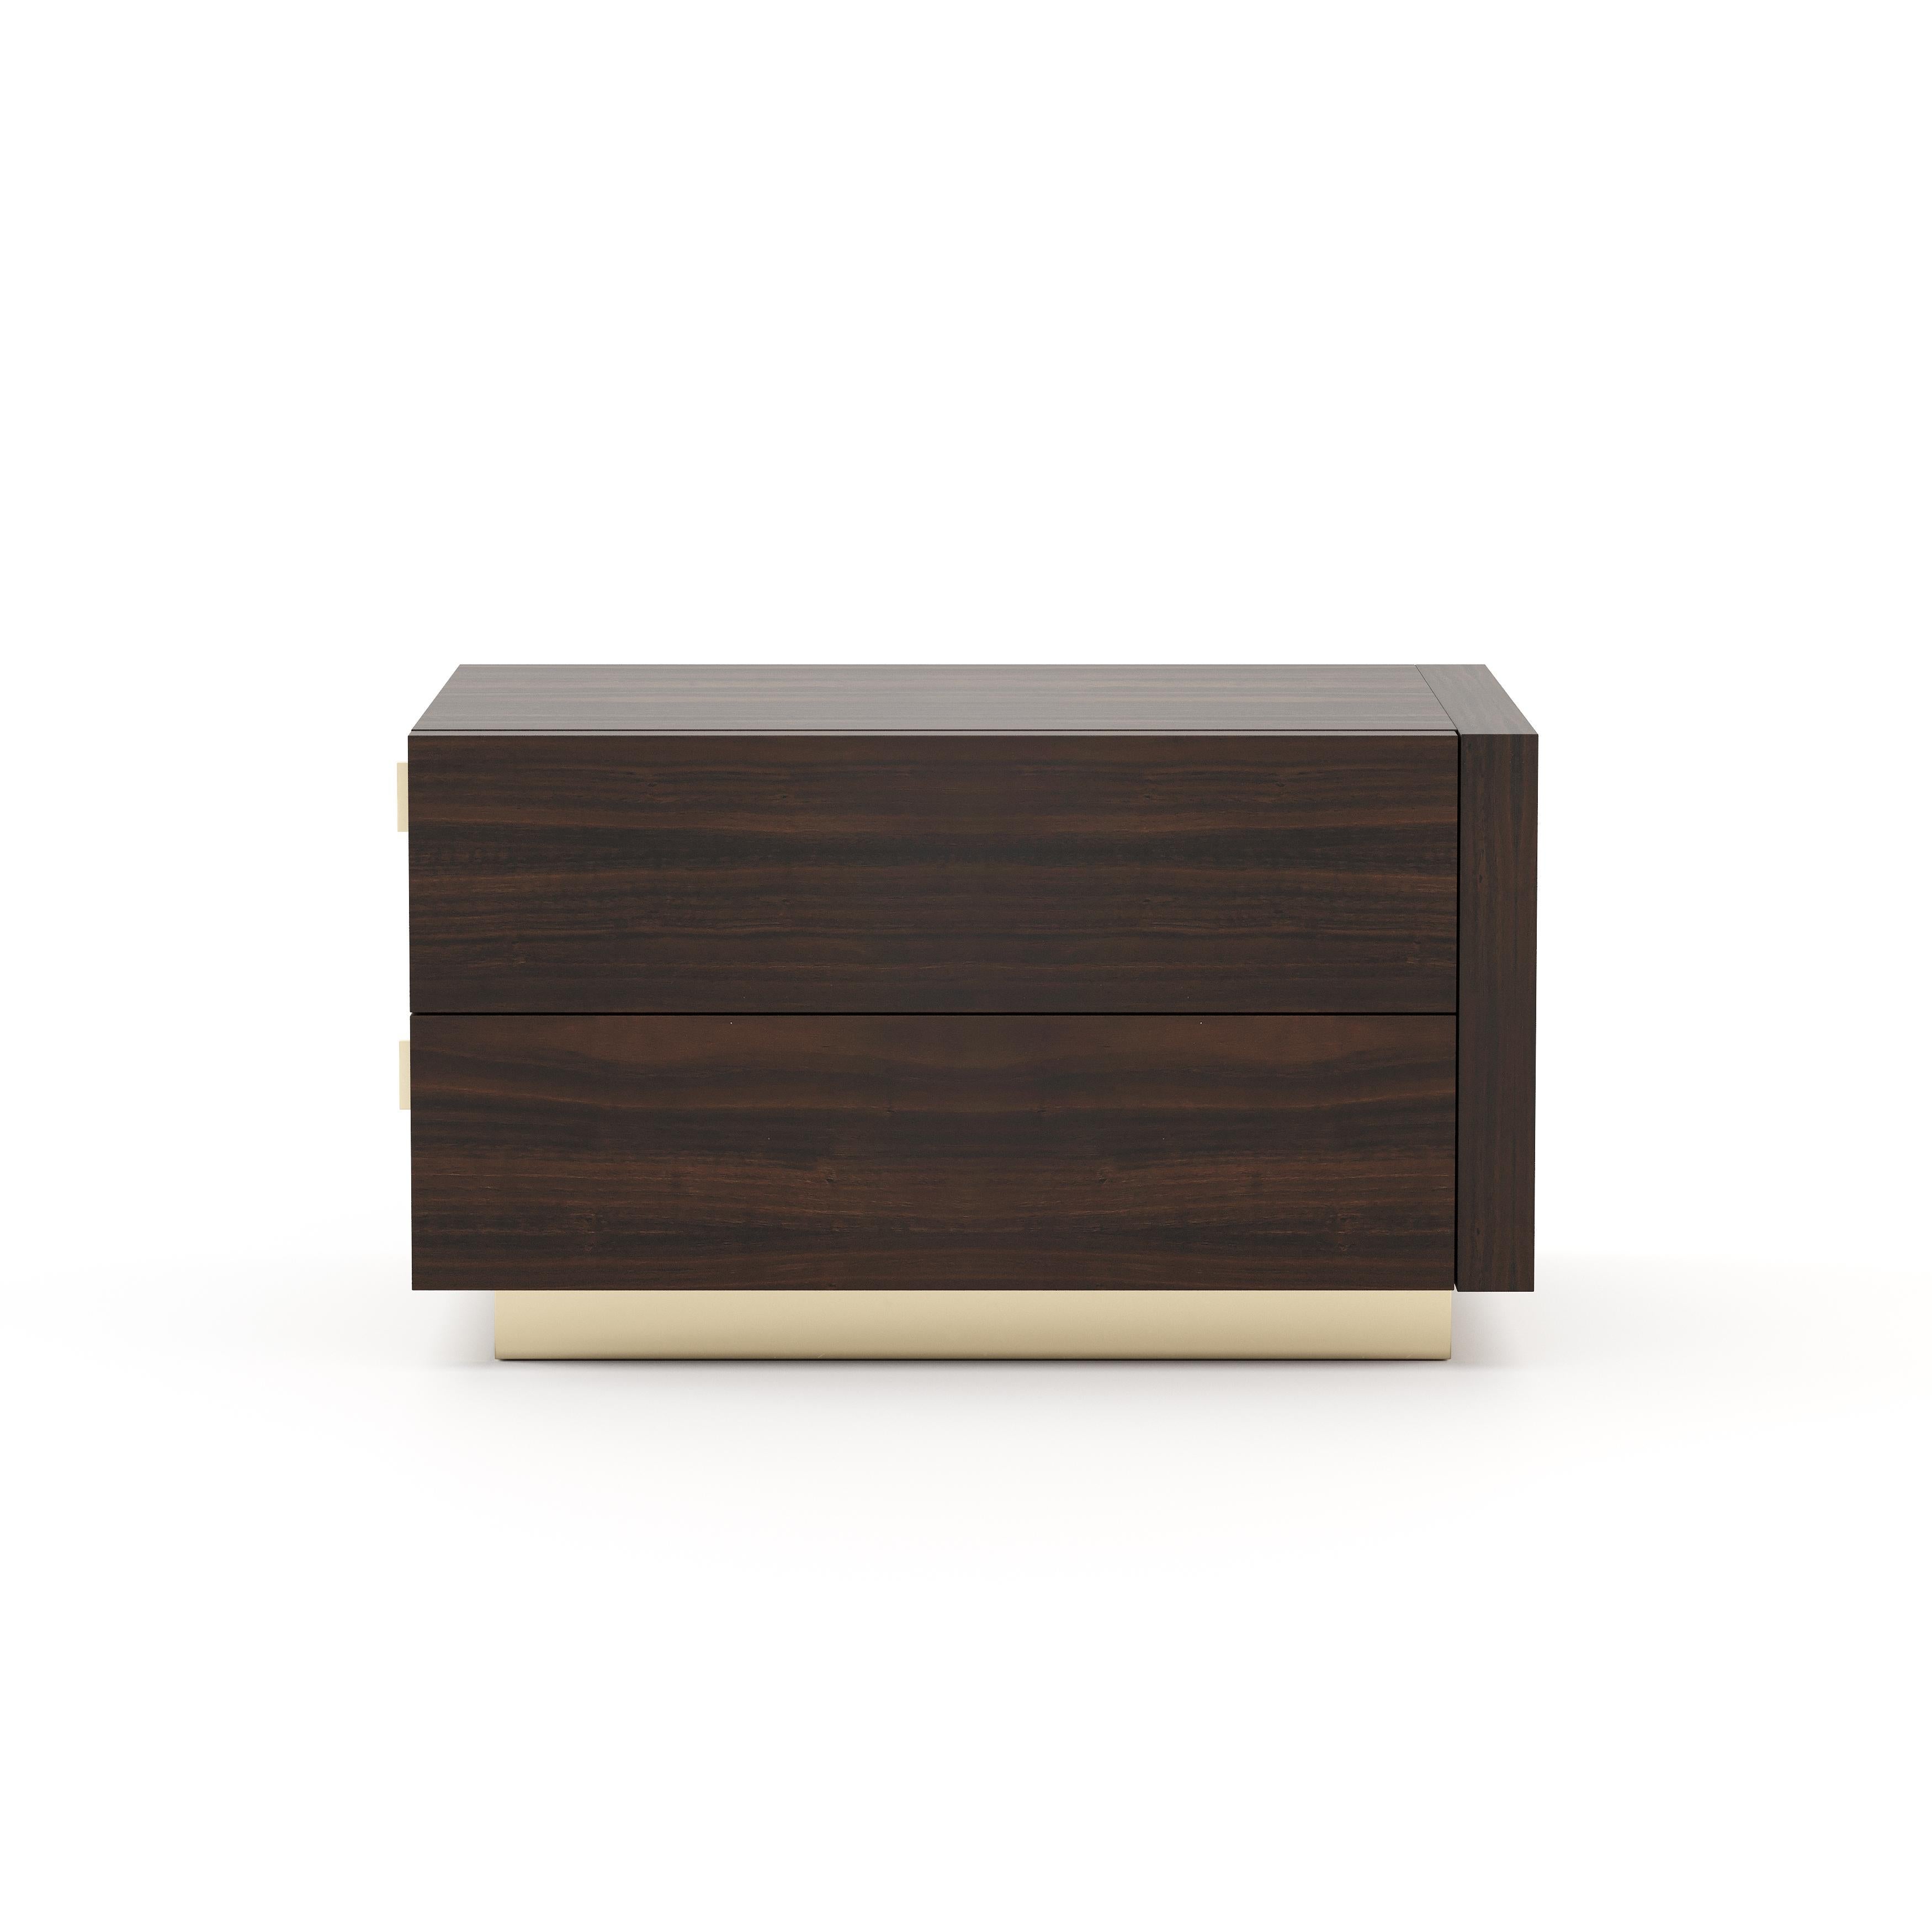 Kira bedside table by Laskasas is the regal piece to stand beside a luxurious bed. This nightstand in smooth wood features two soft-close drawers and a beautiful custom-made metal base.

* Available in different finishes.
** Also available with